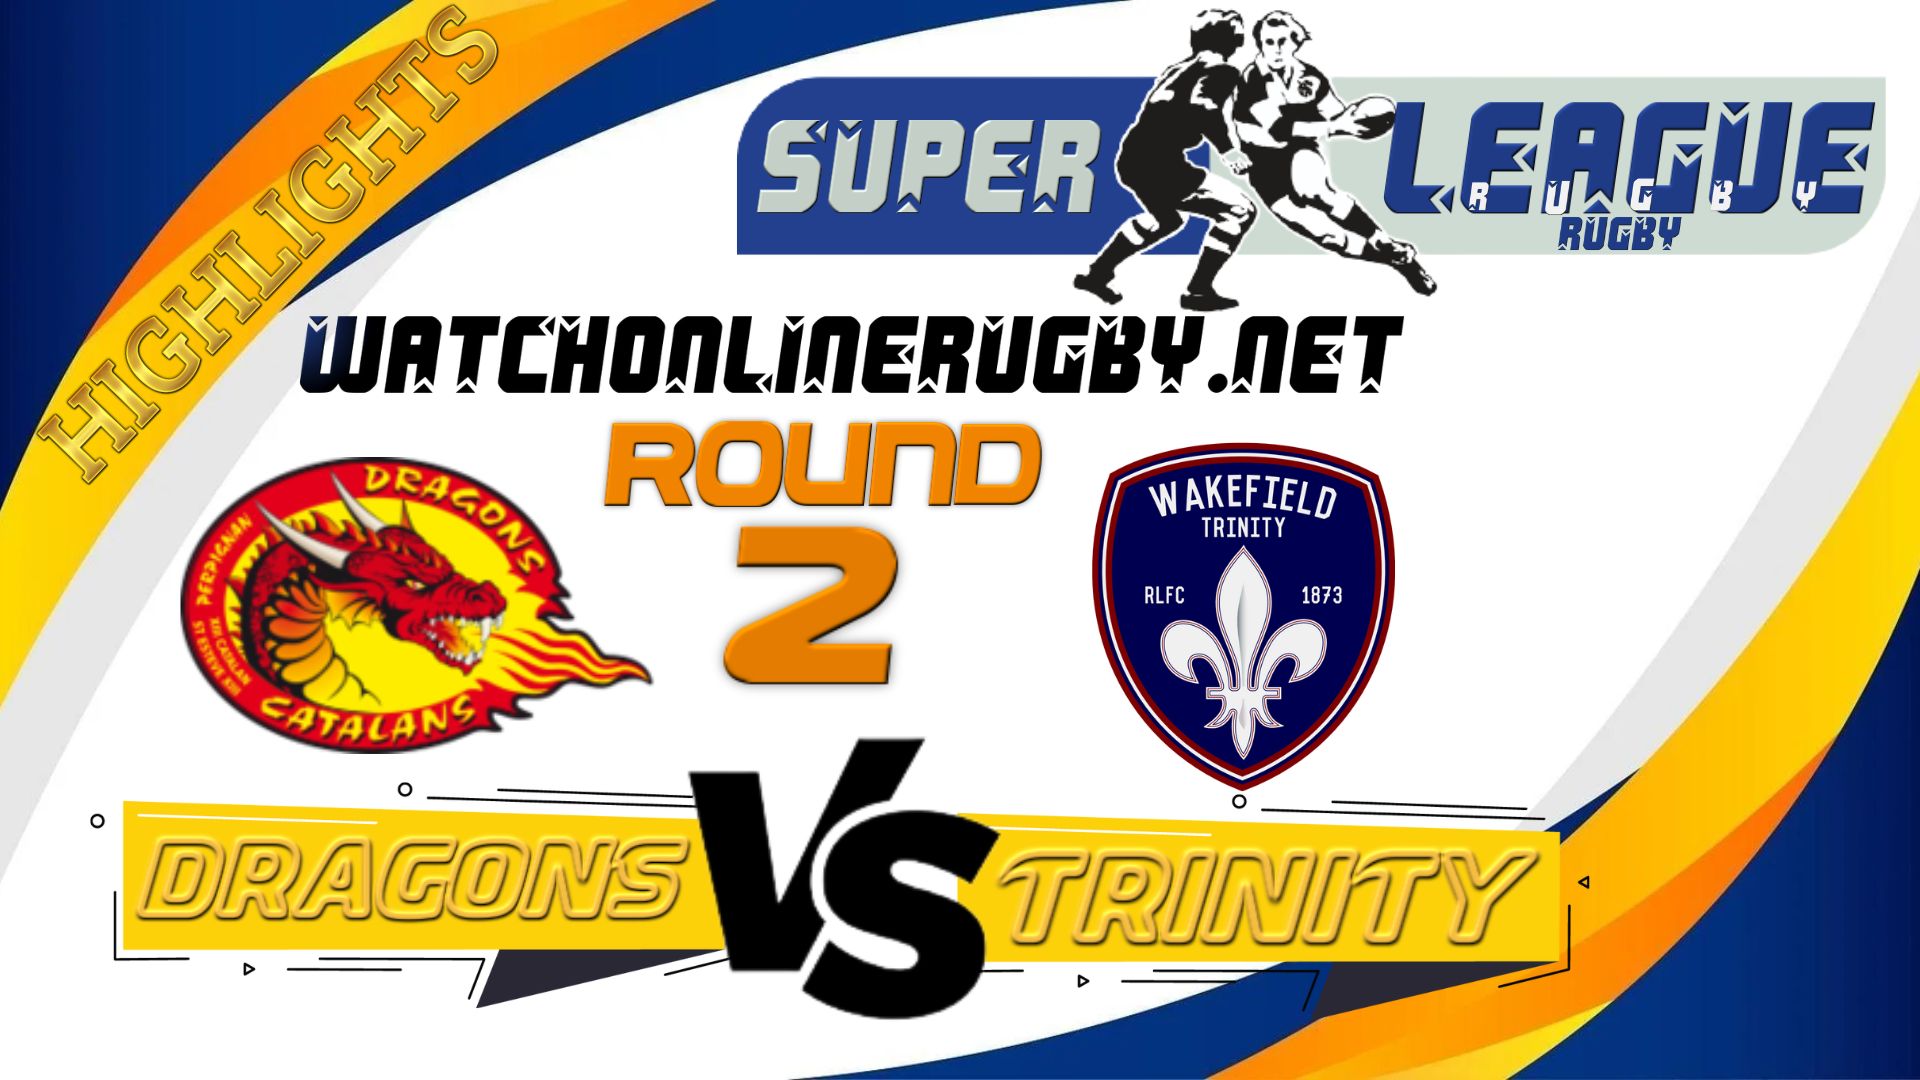 Catalans Dragons Vs Wakefield Trinity Super League Rugby 2022 RD 2